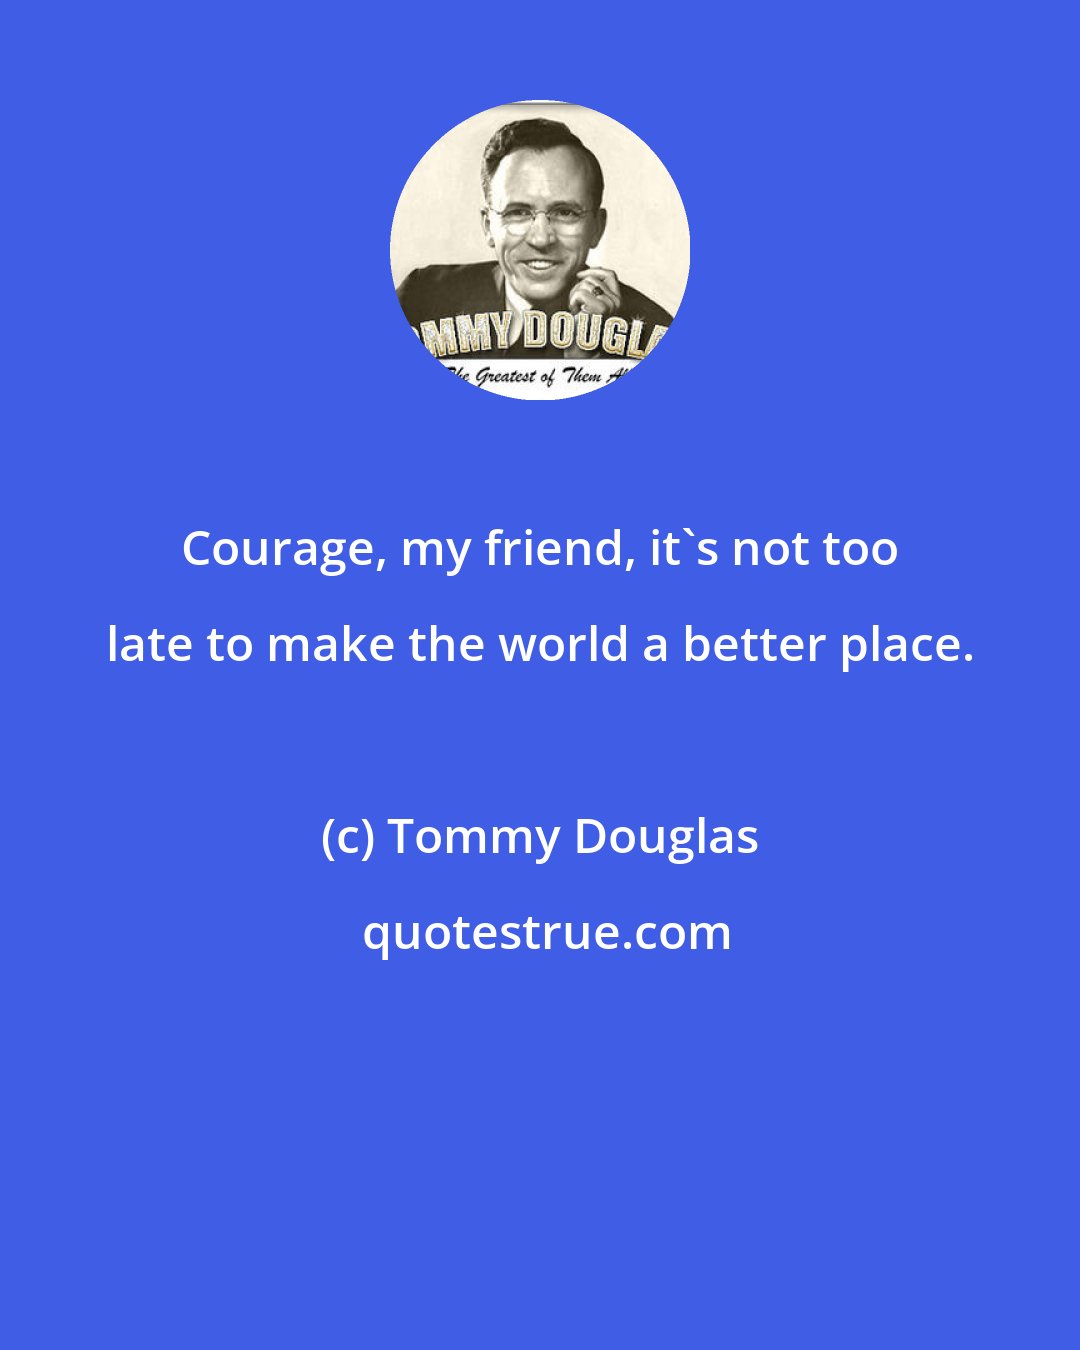 Tommy Douglas: Courage, my friend, it's not too late to make the world a better place.